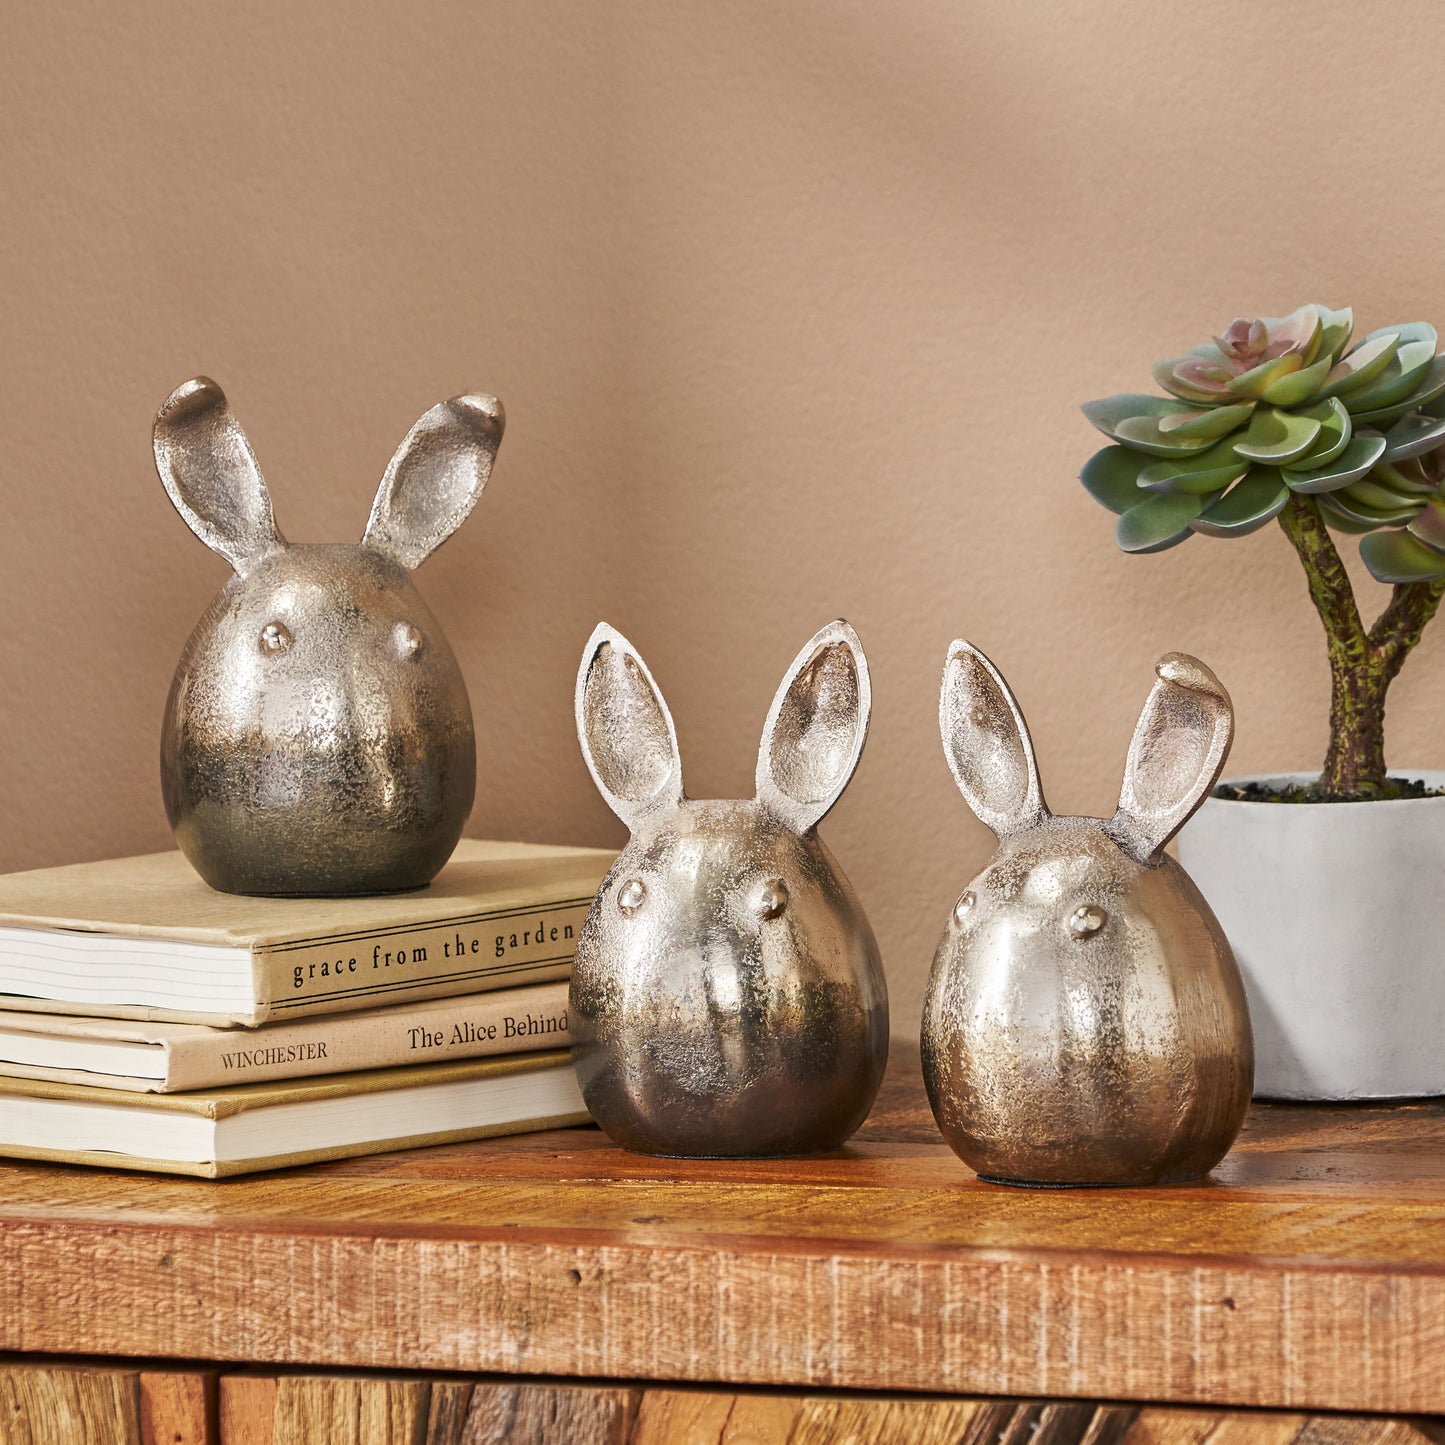 Dola Handcrafted Aluminum Bunny Figurines (Set of 3), Pewter